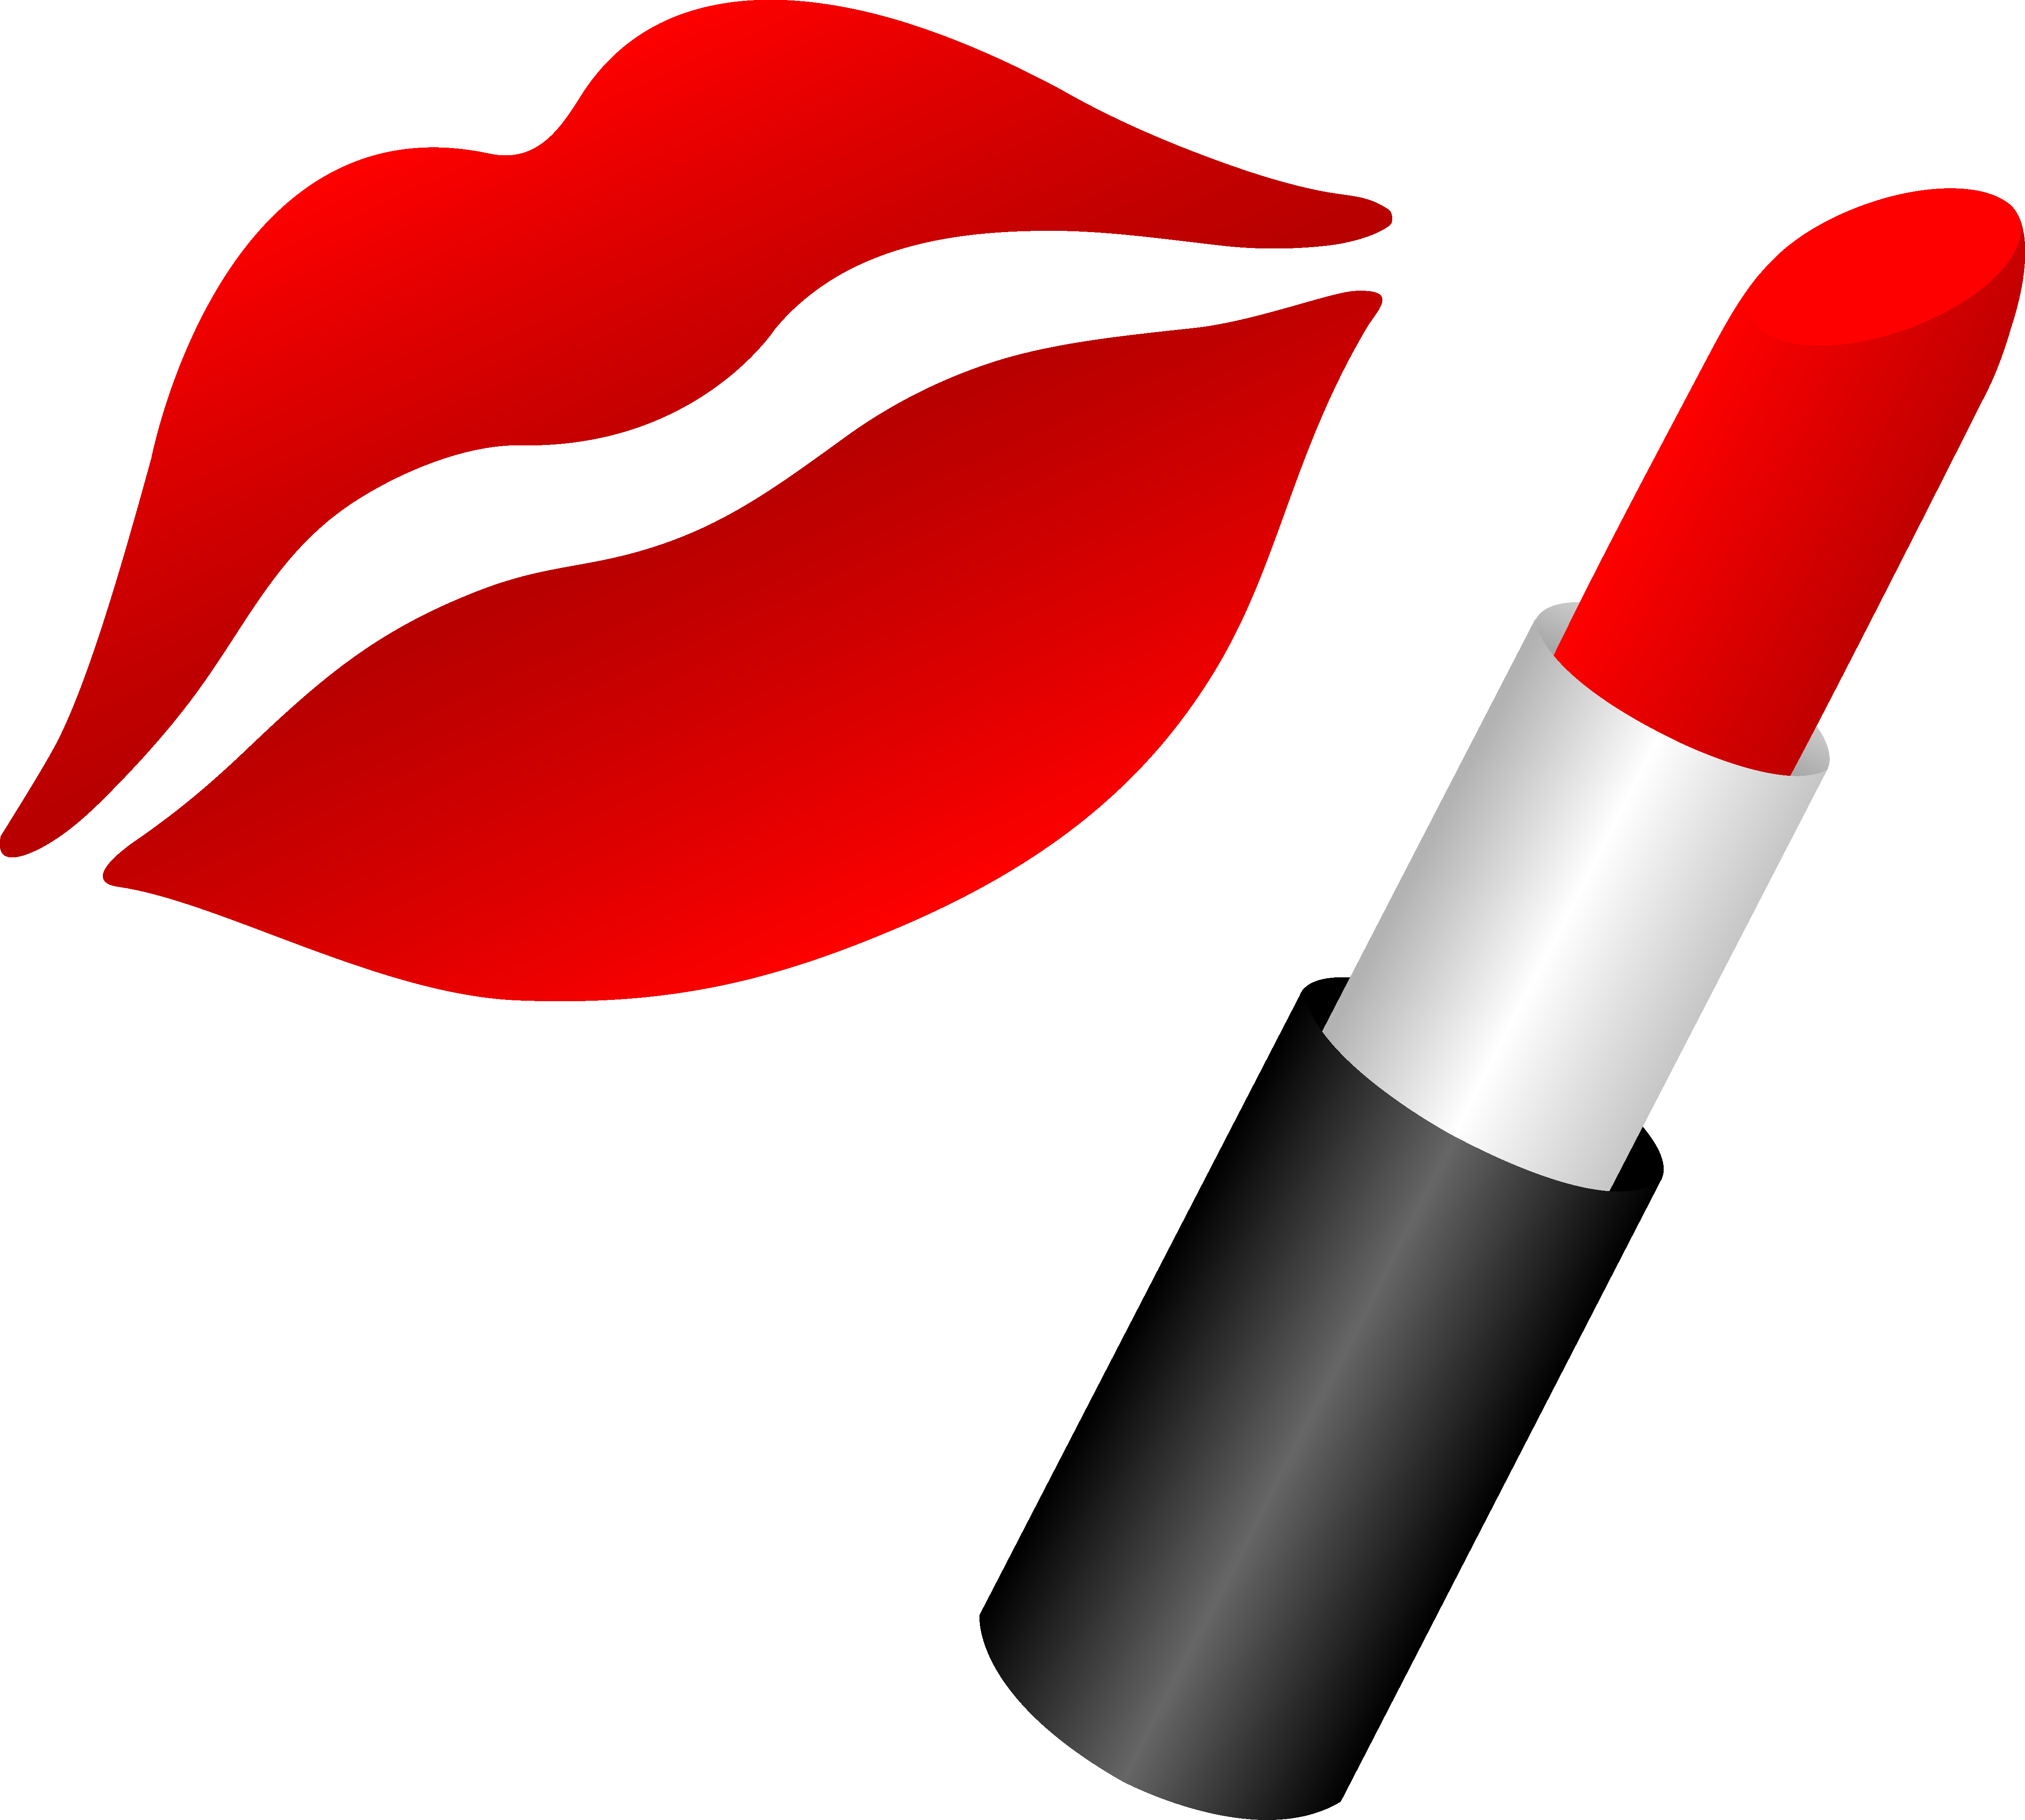 Outline clipart mouth. Lips with red lipstick